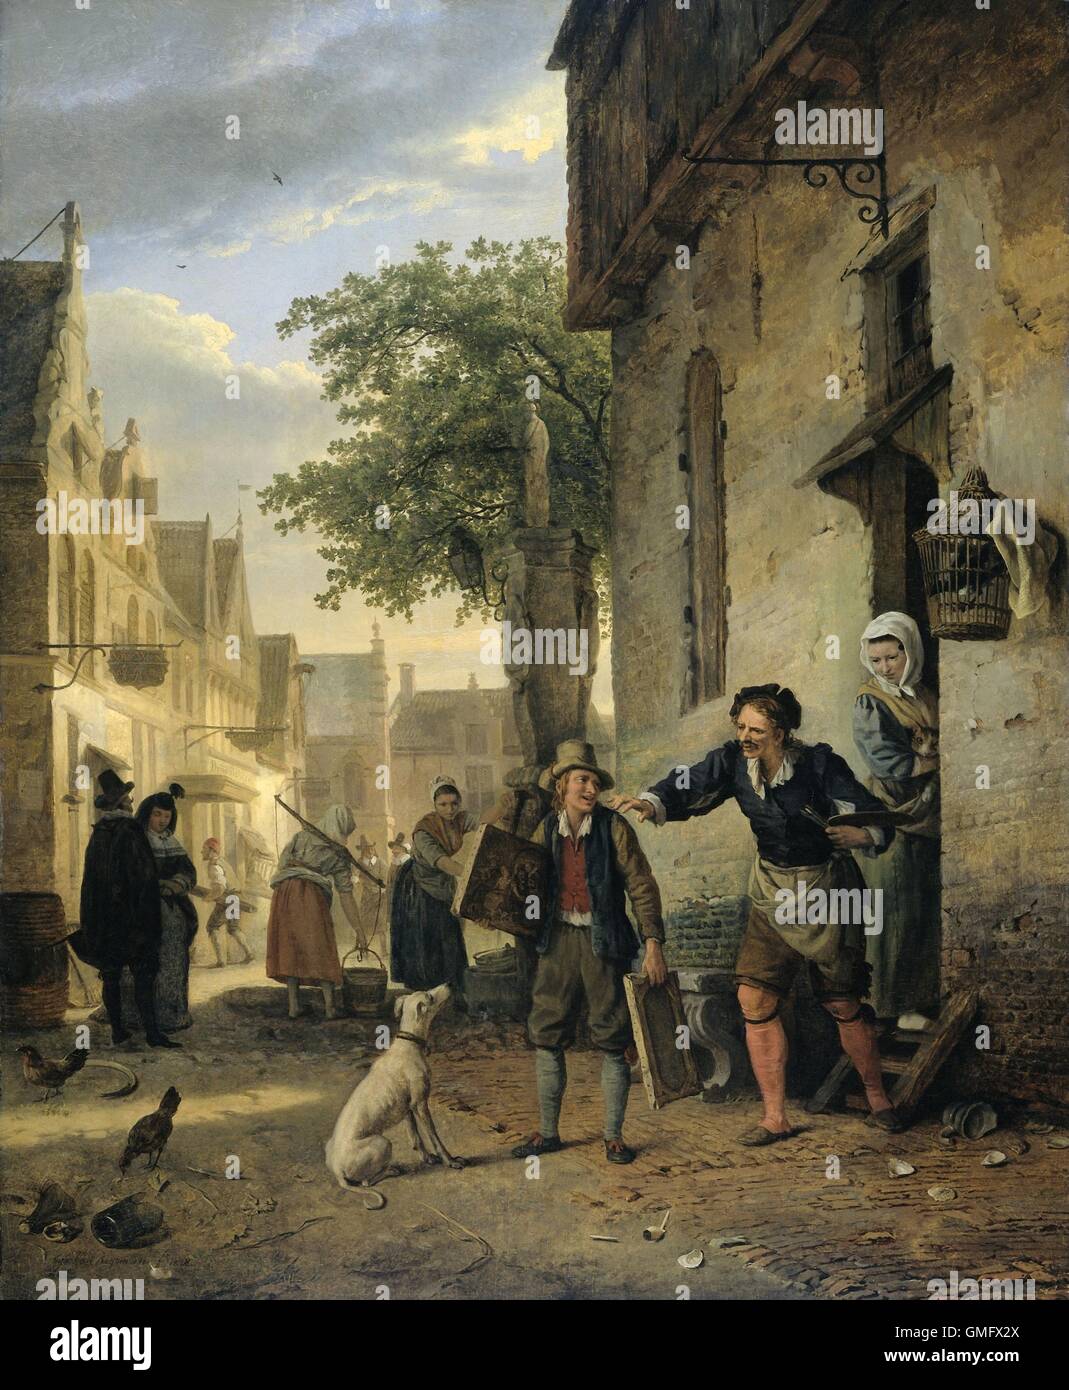 Jan Steen Sends his Son to the Streets to Exchange Paintings for Beer and Wine, by Ignatius Josephus Van Regemorter, 1828, oil on panel. Steen acknowledged he was a drinker and womanizer. He painted many scenes of such revelry. (BSLOC 2016 2 132) Stock Photo